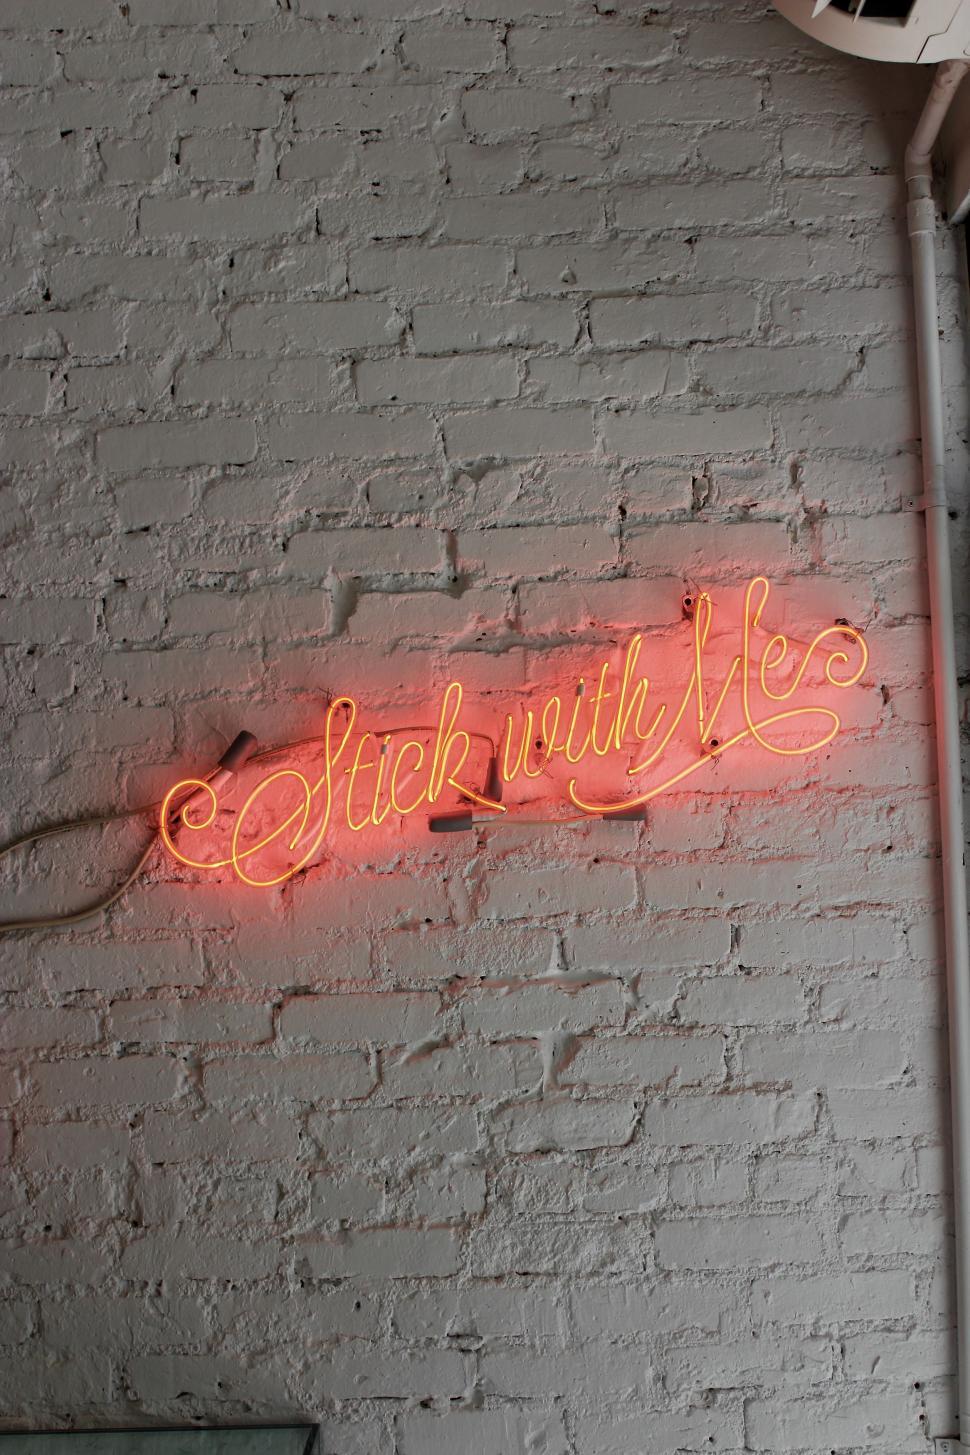 Free Image of Neon Sign on Brick Wall: Stick With Me 